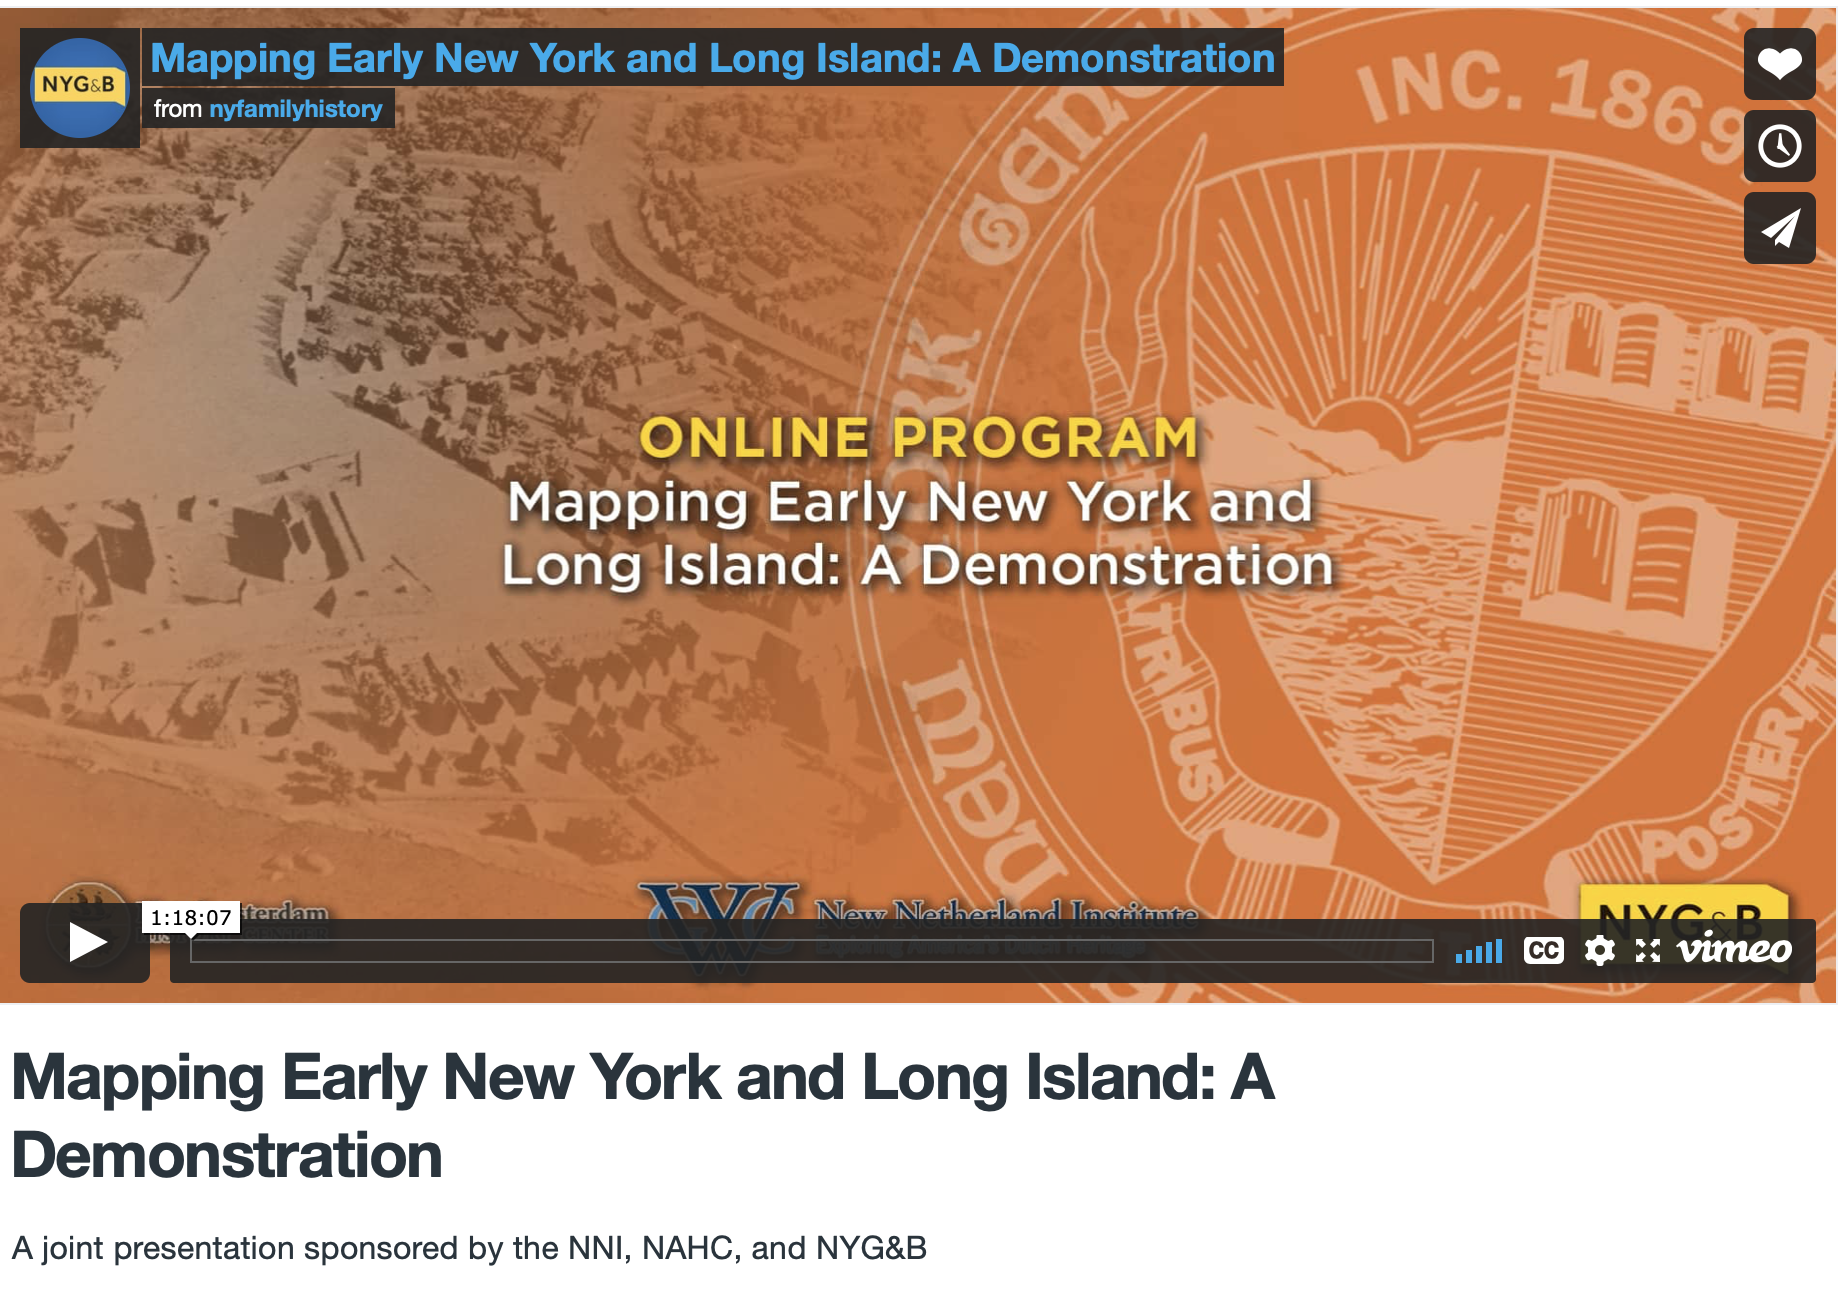 Mapping Early New York and Long Island: A Demonstration